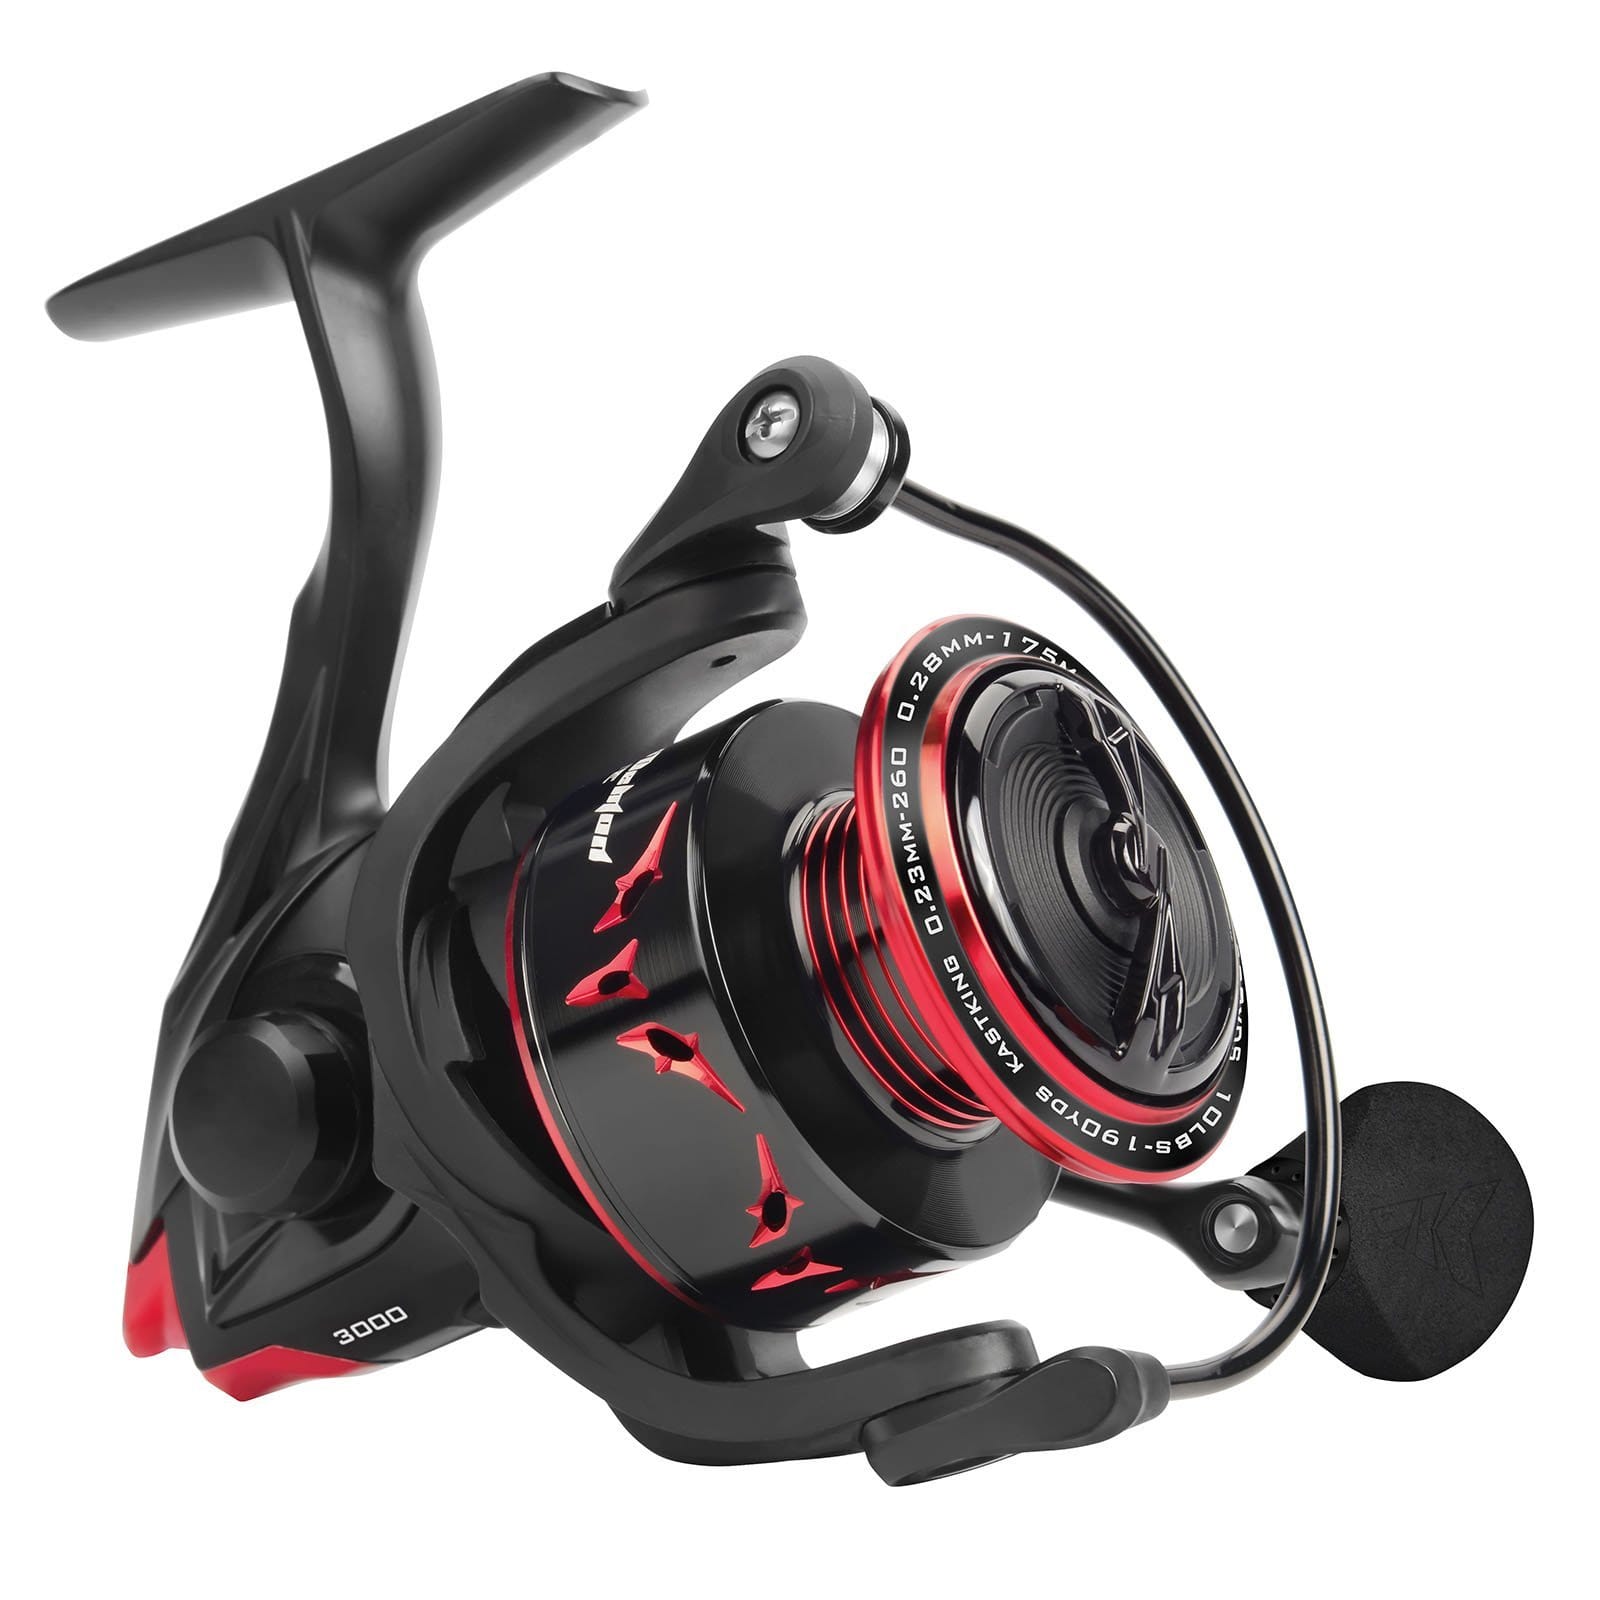 Replace Your Kastking Baitcaster Reel Handle - Step-by-step